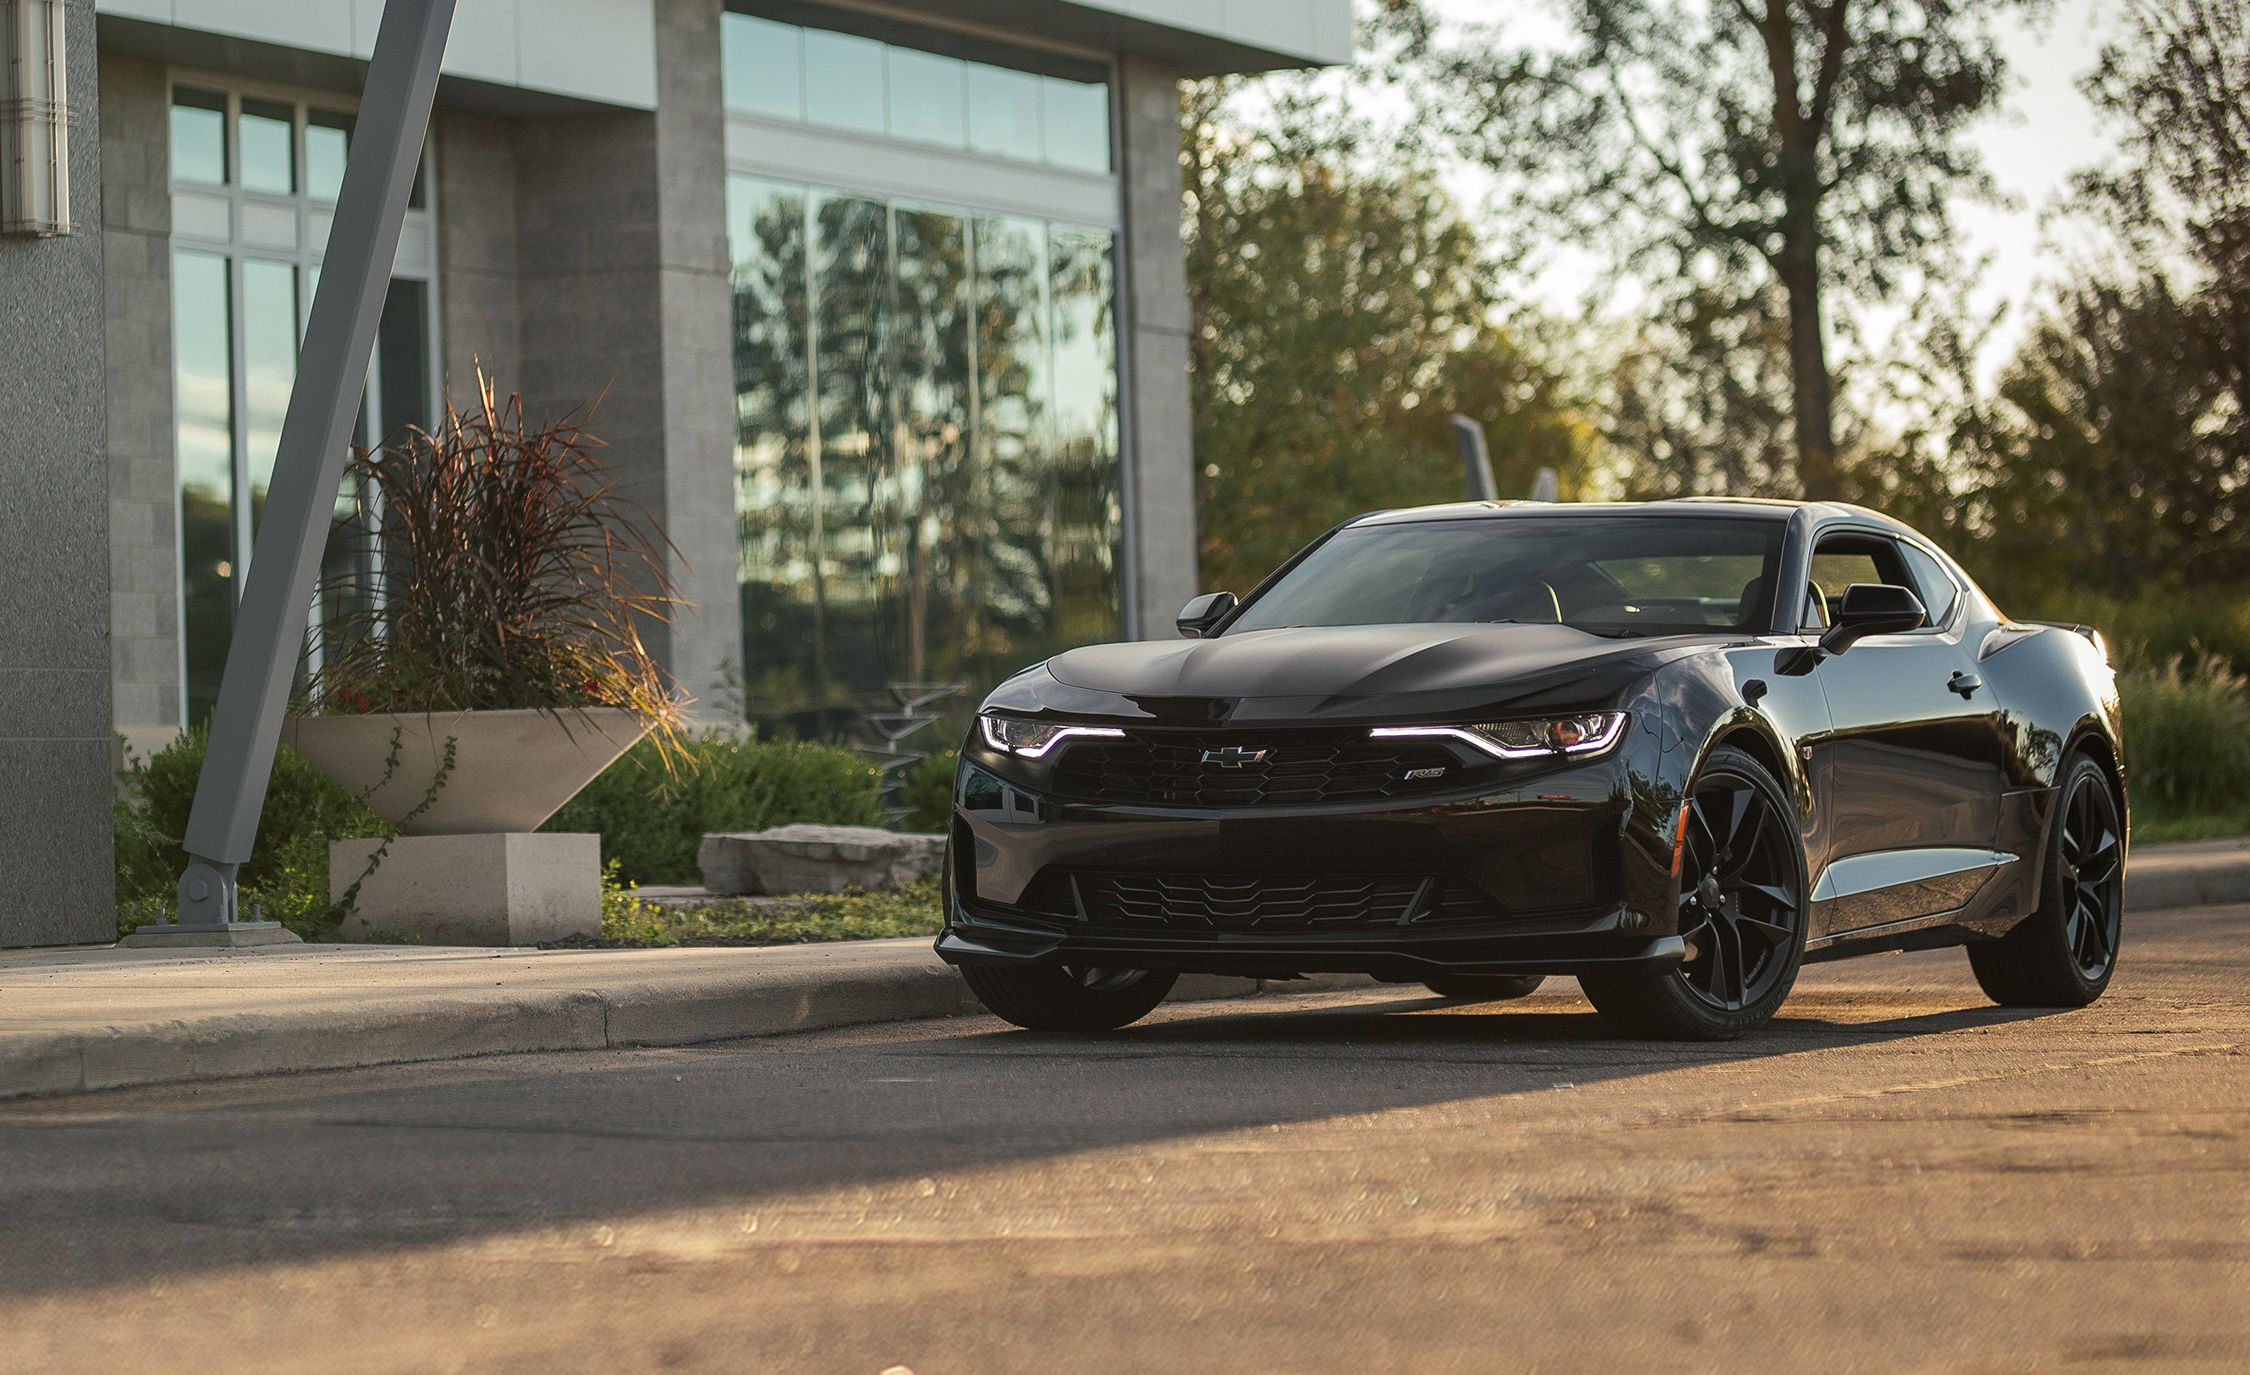 2019 Chevrolet Camaro Review, Pricing, and Specs